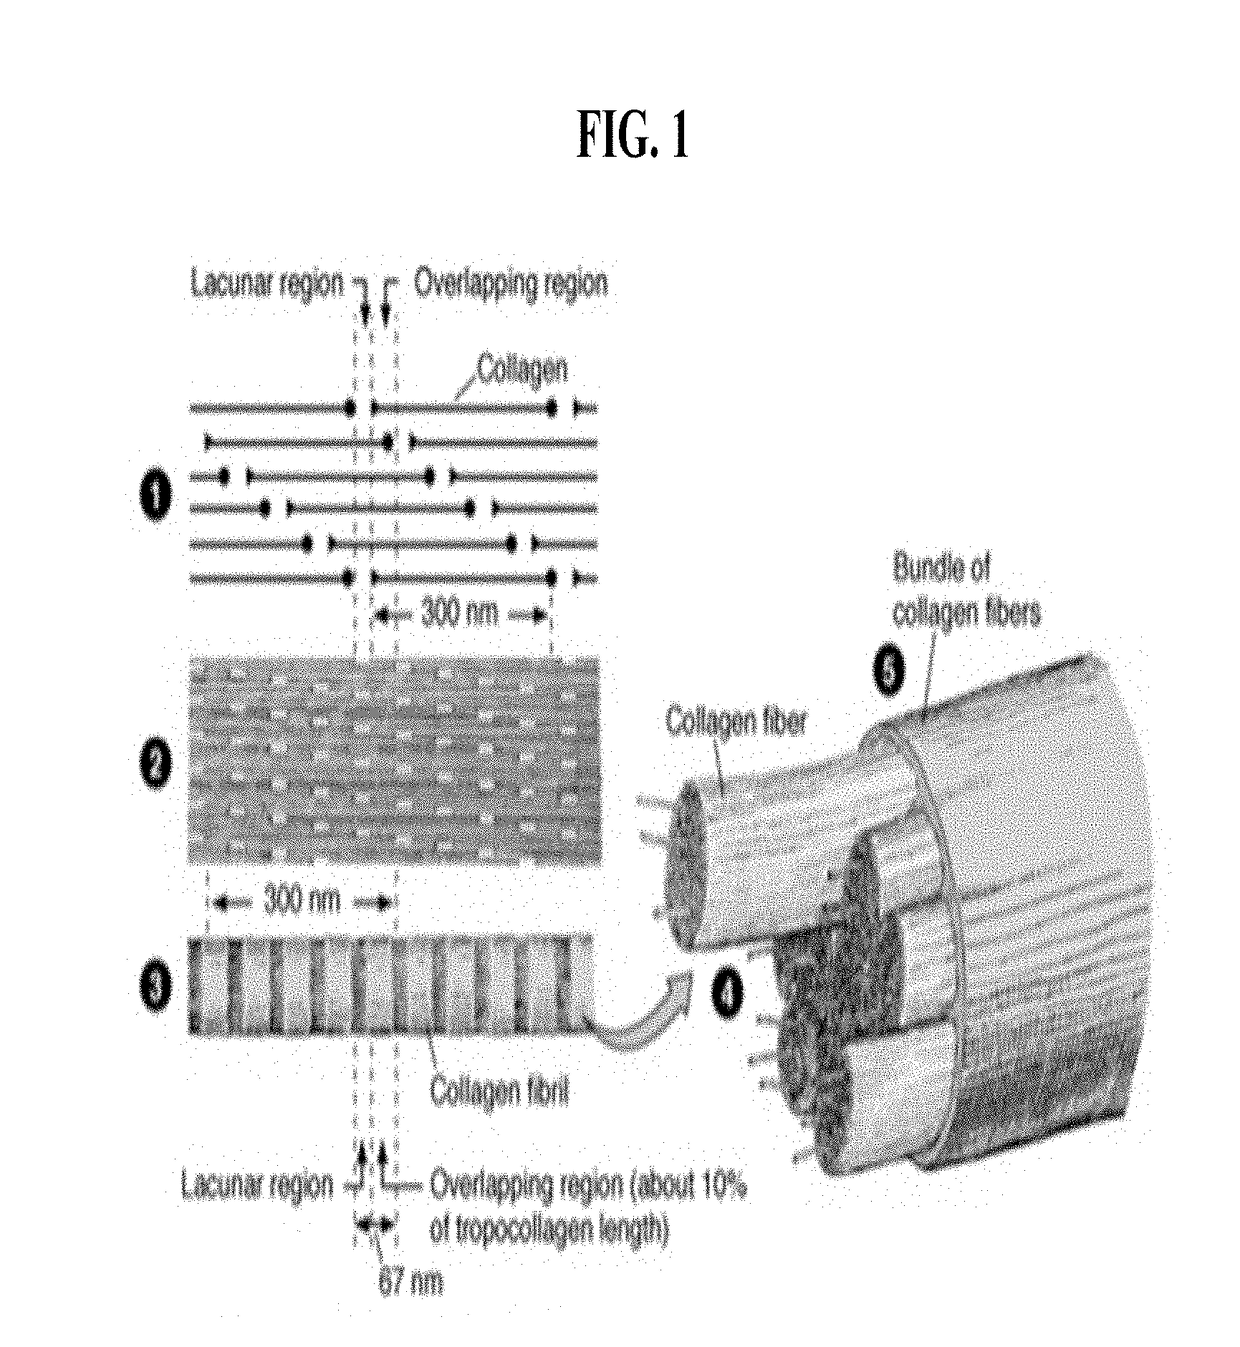 Method for making a biofabricated material containing collagen fibrils